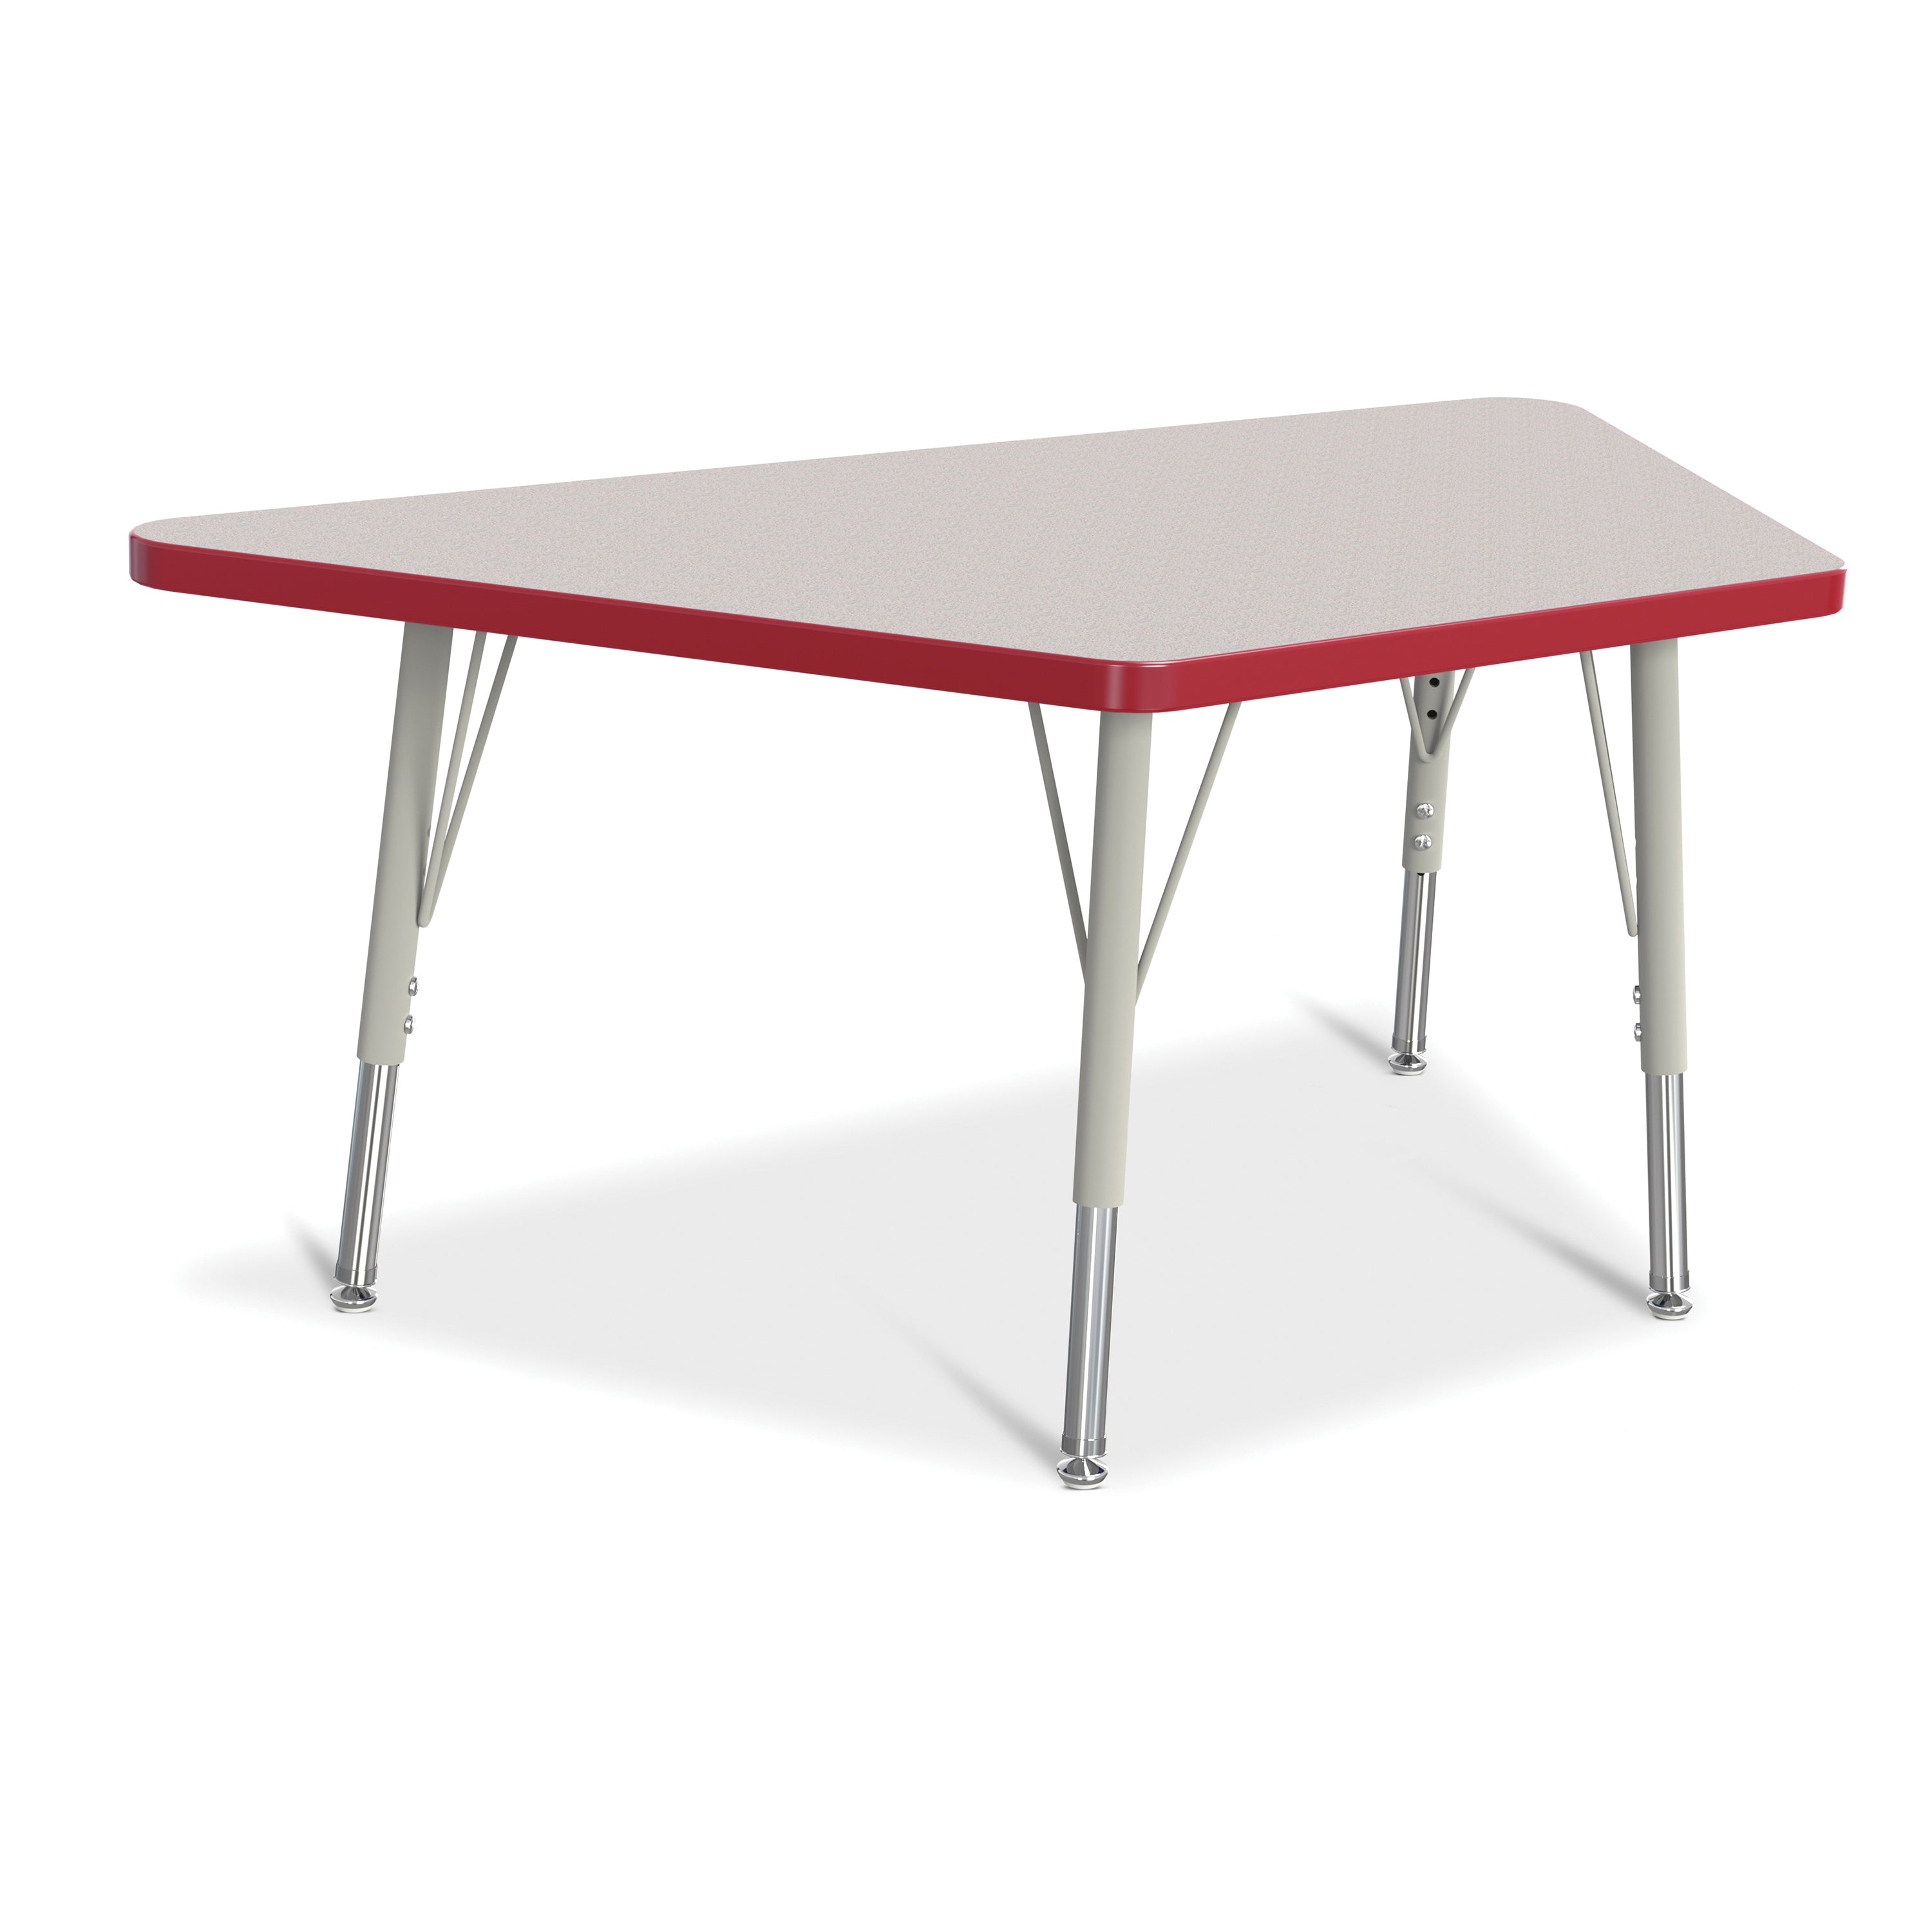 6438JCE008, Berries Trapezoid Activity Tables - 24" X 48", E-height - Freckled Gray/Red/Gray